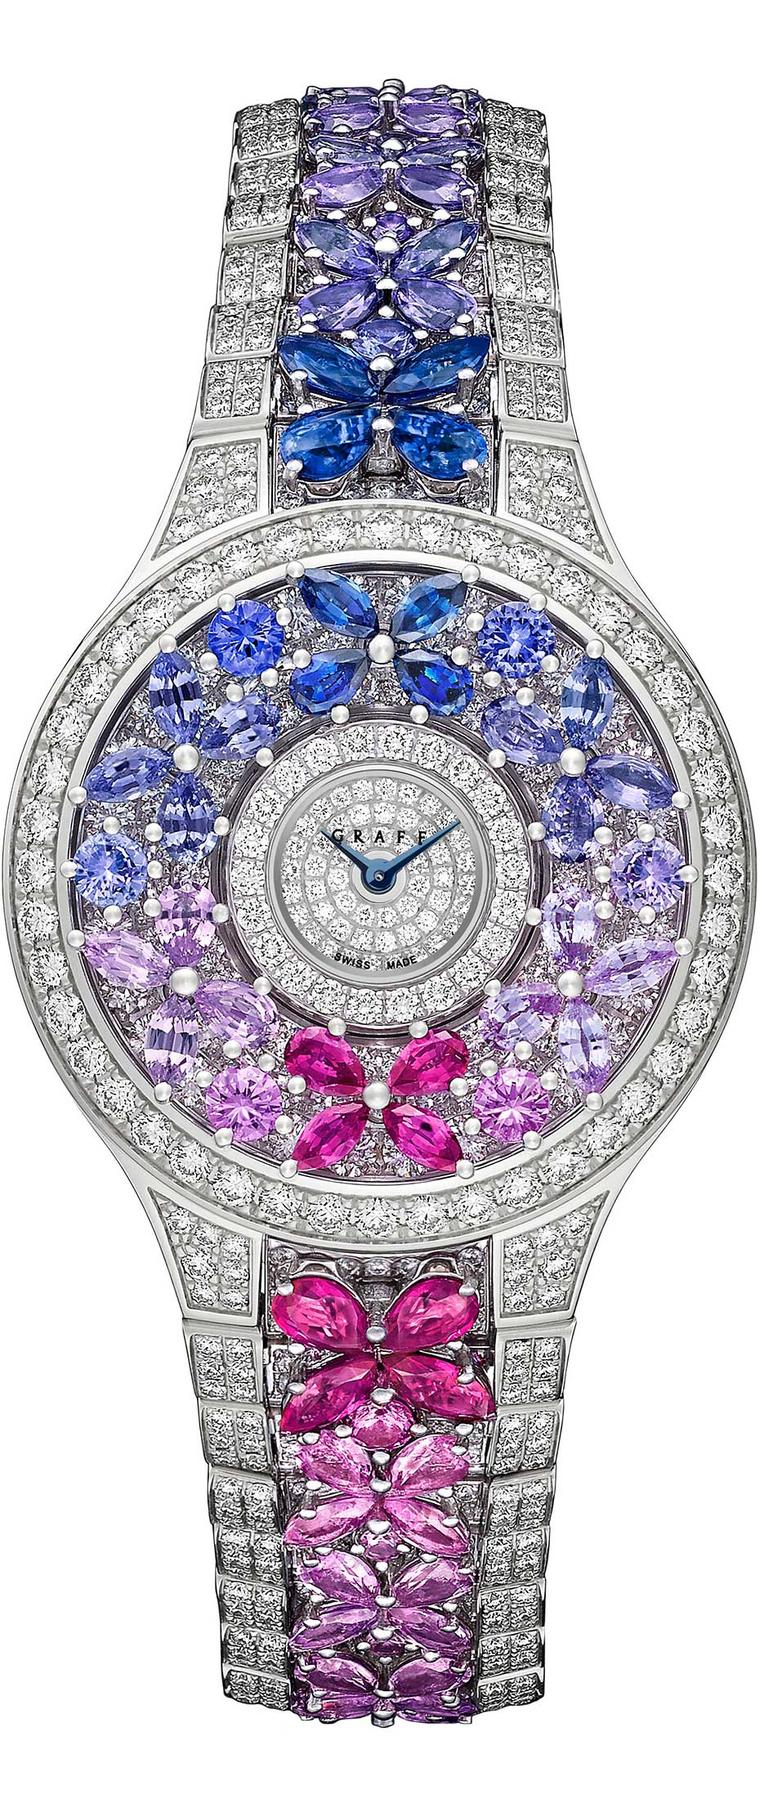 Graff Multi-Coloured Butterfly watch features an all-diamond design with richly coloured sapphires, rubies and emeralds.